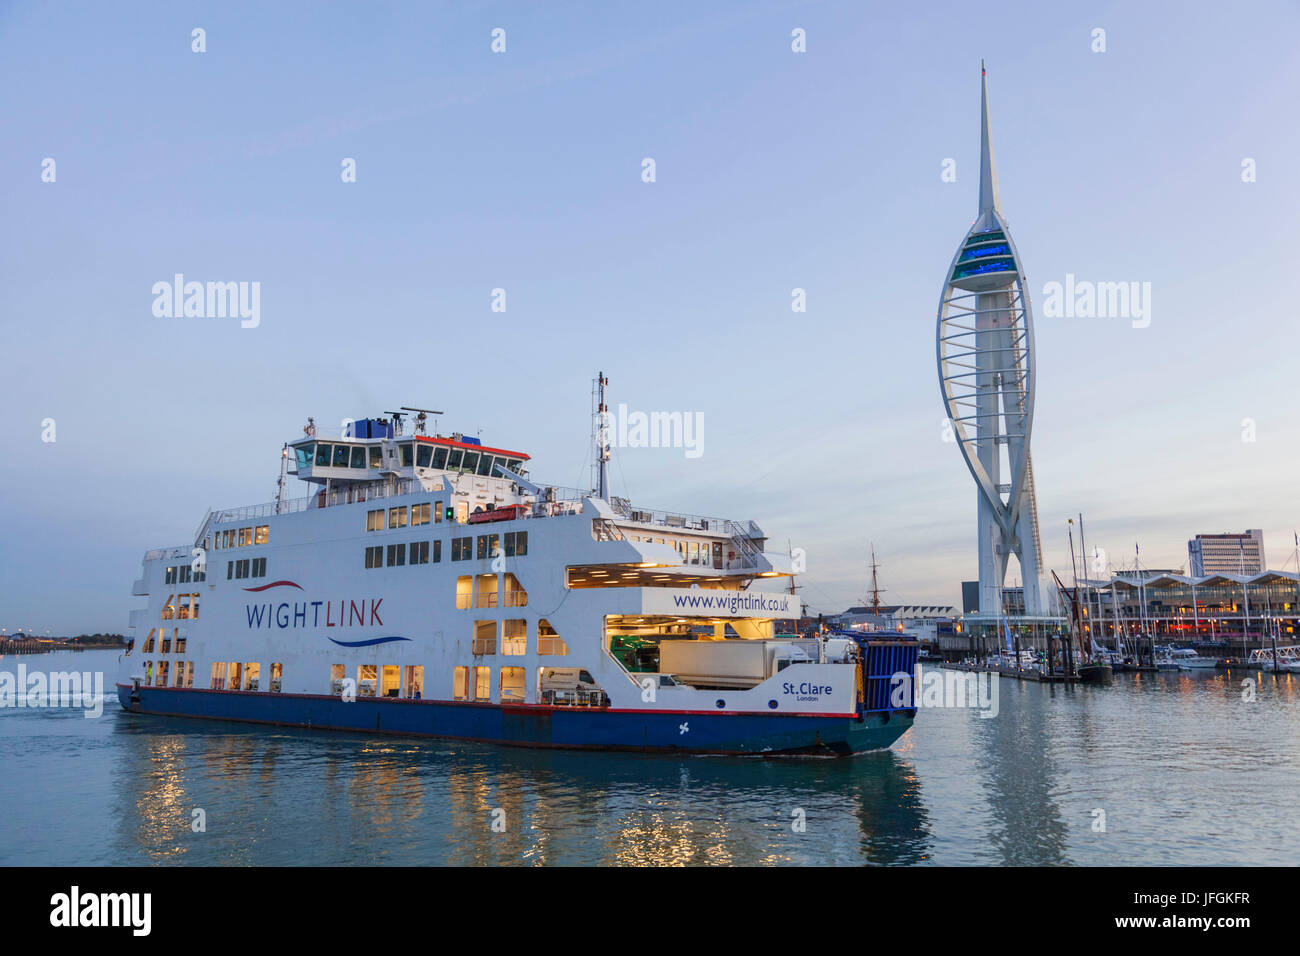 England, Hampshire, Portsmouth, Wightlink Ferry and Spinnaker Tower Stock Photo